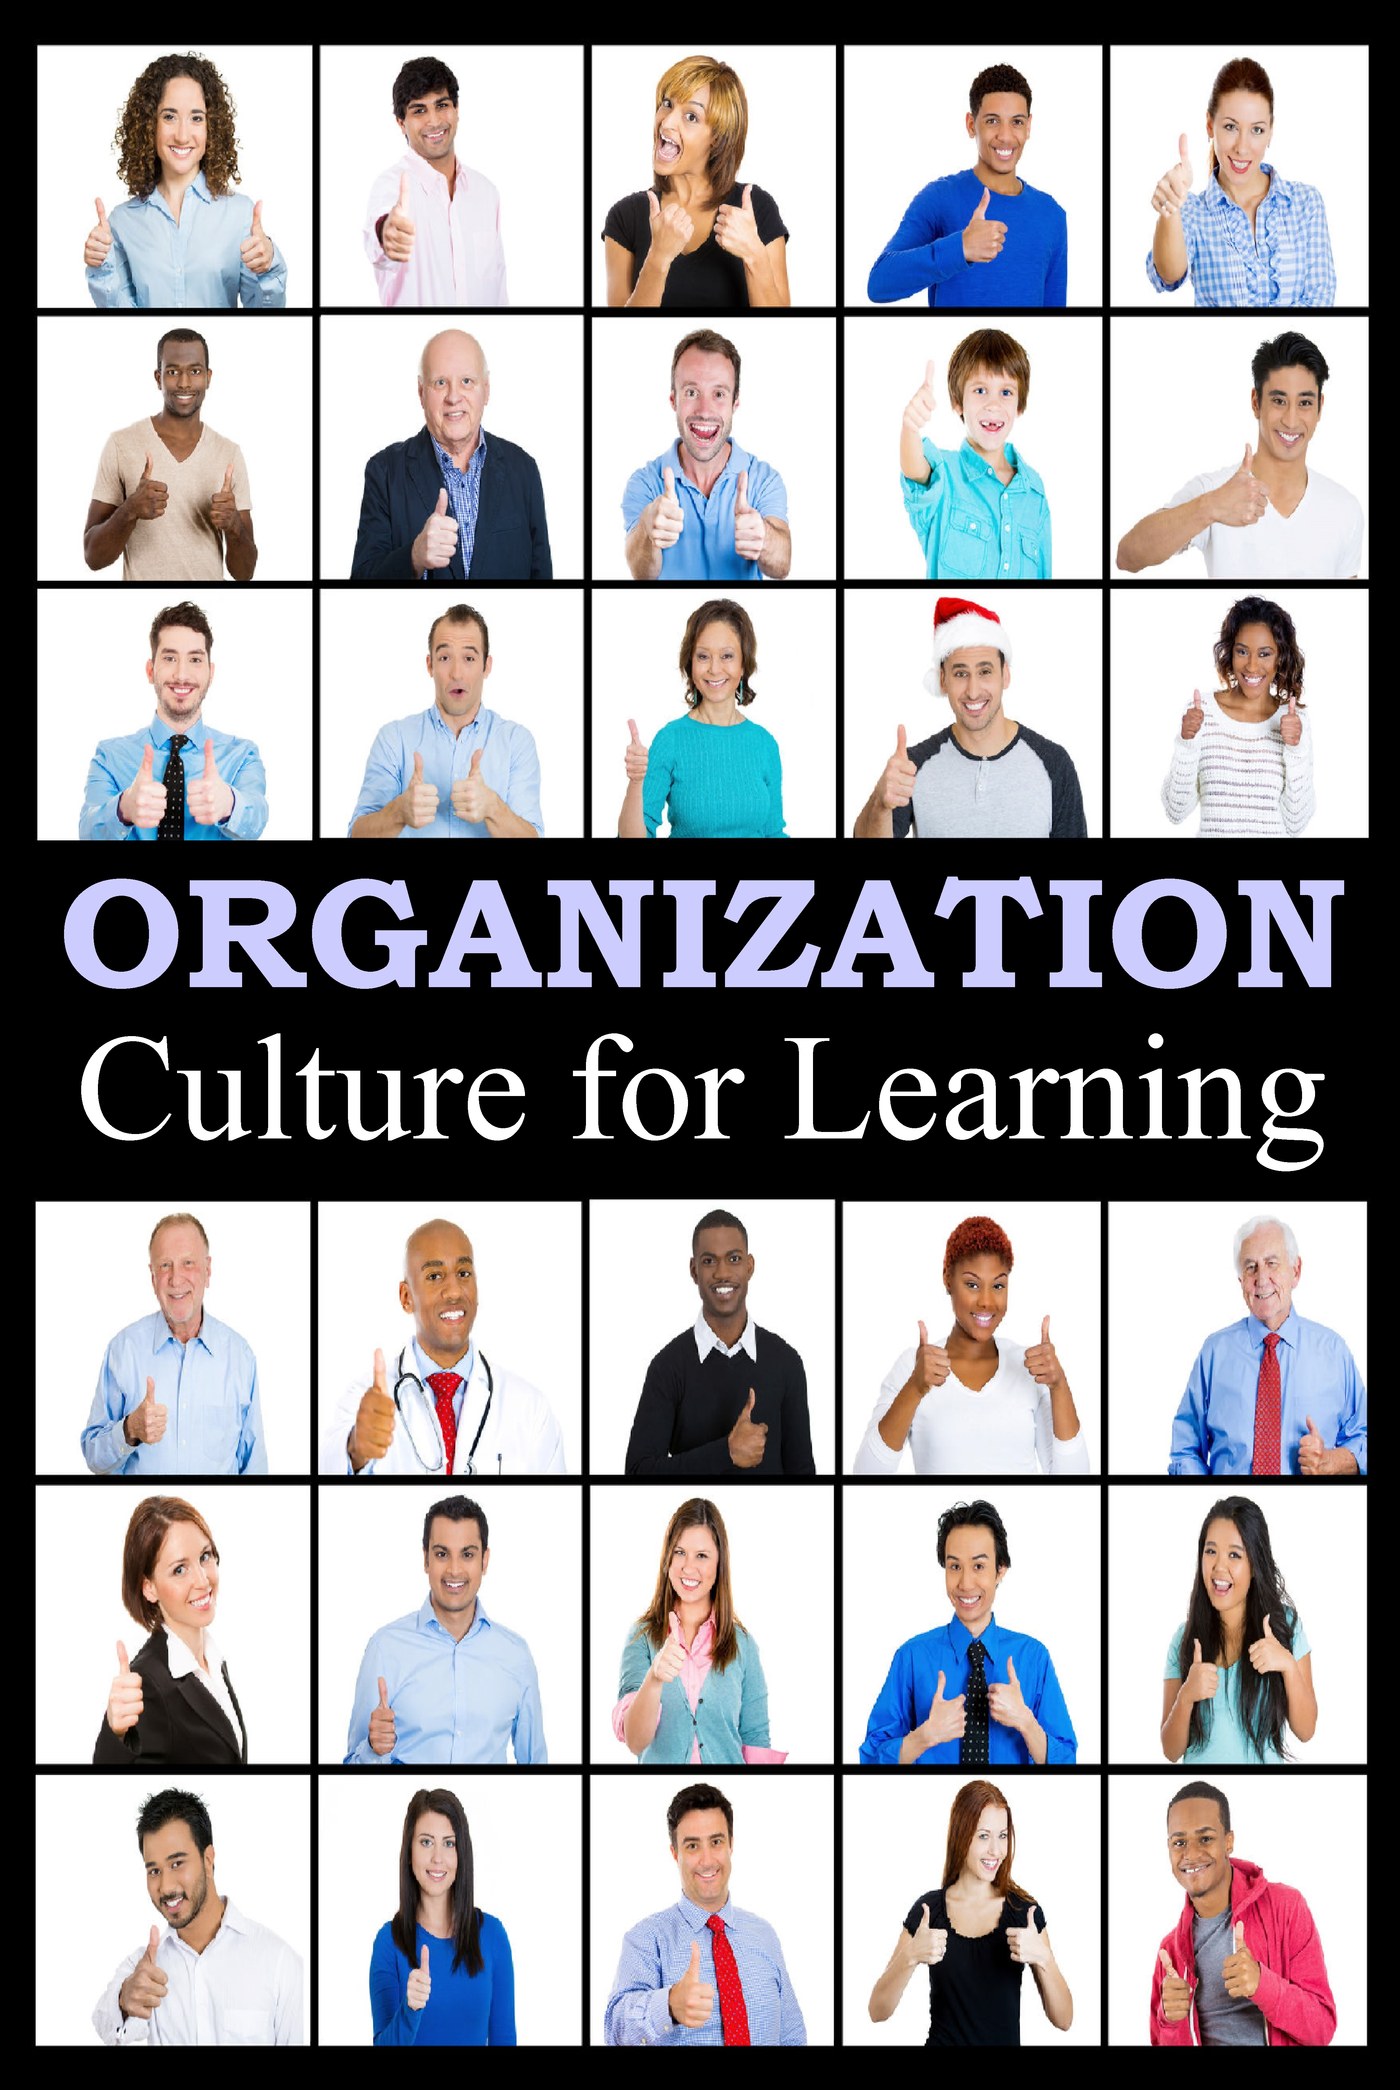 L7071 - Organization Culture for Learning